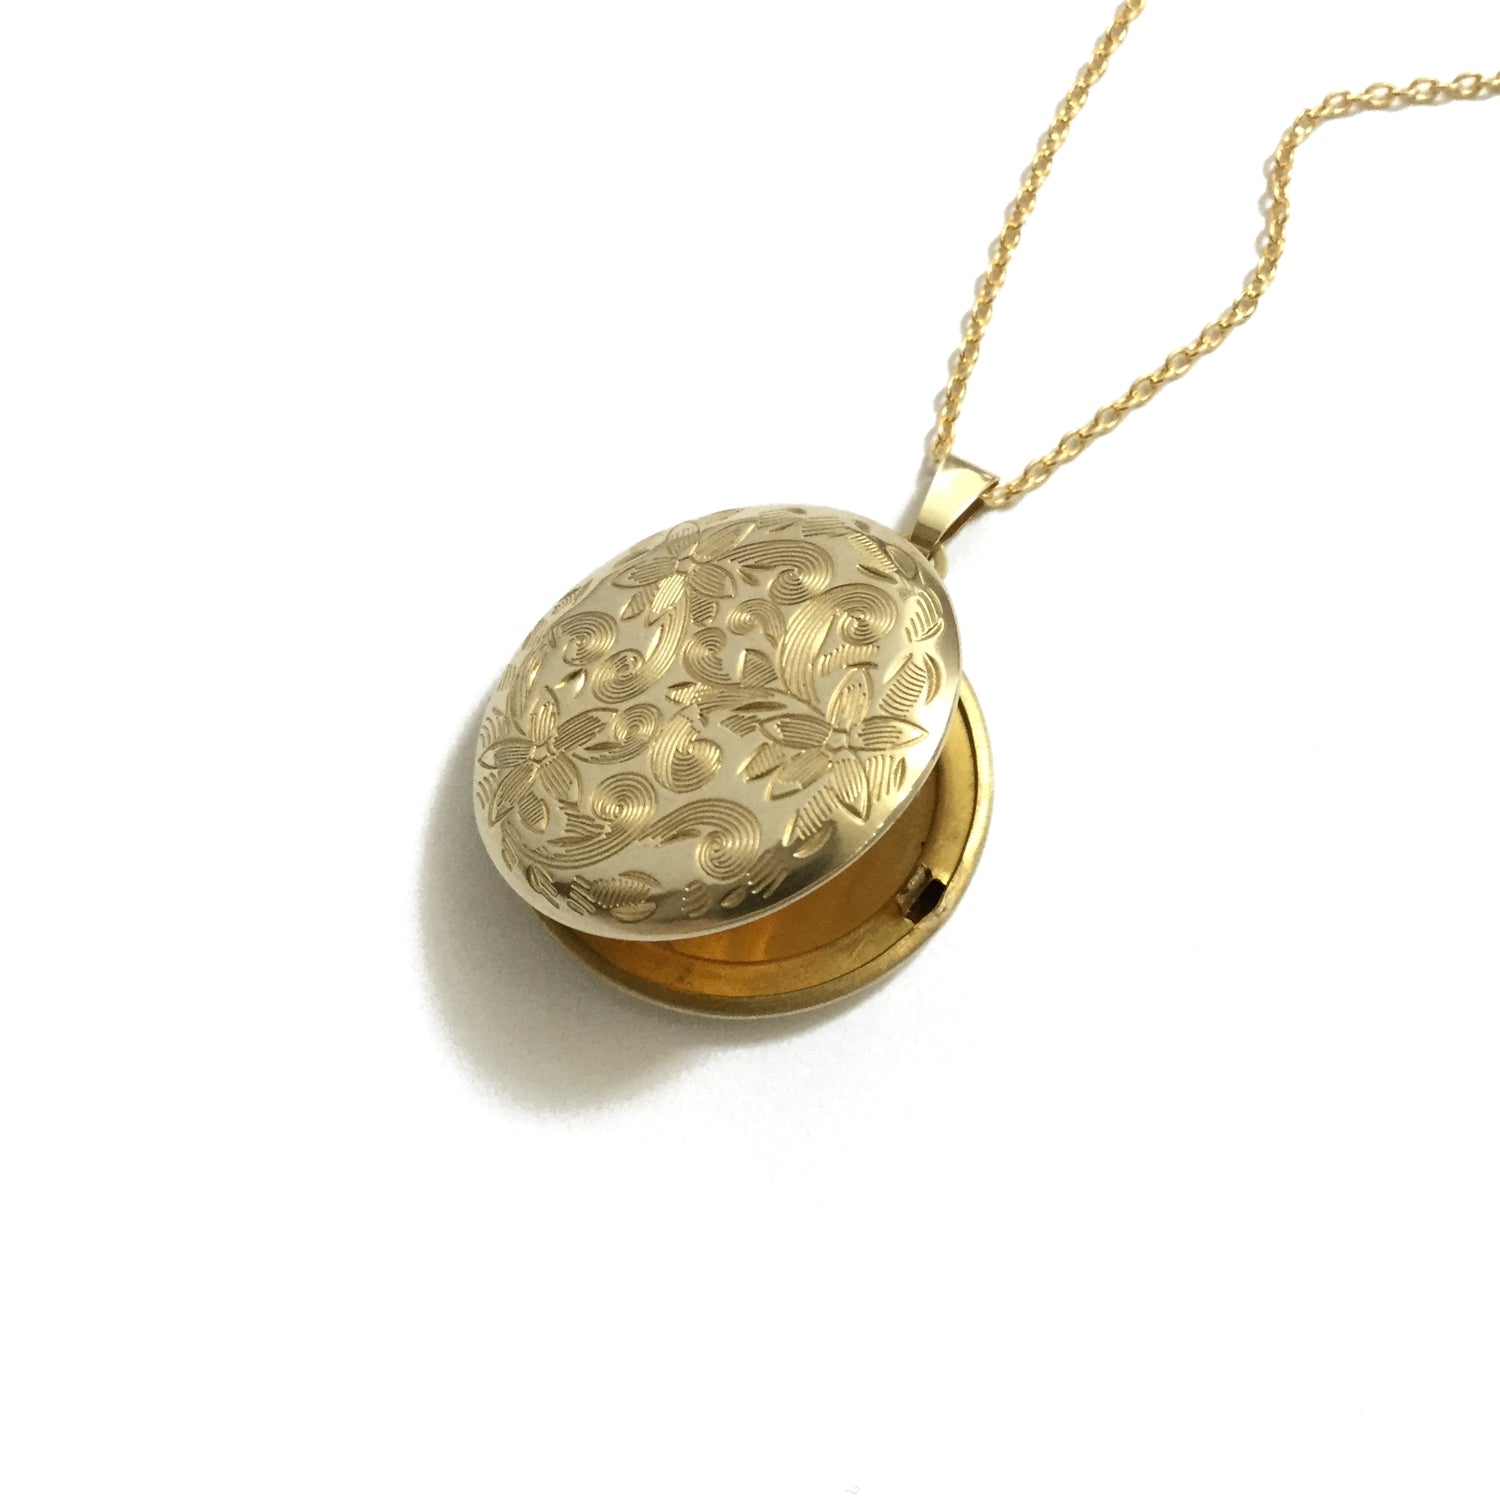 Gold plated shiny brass round floral locket